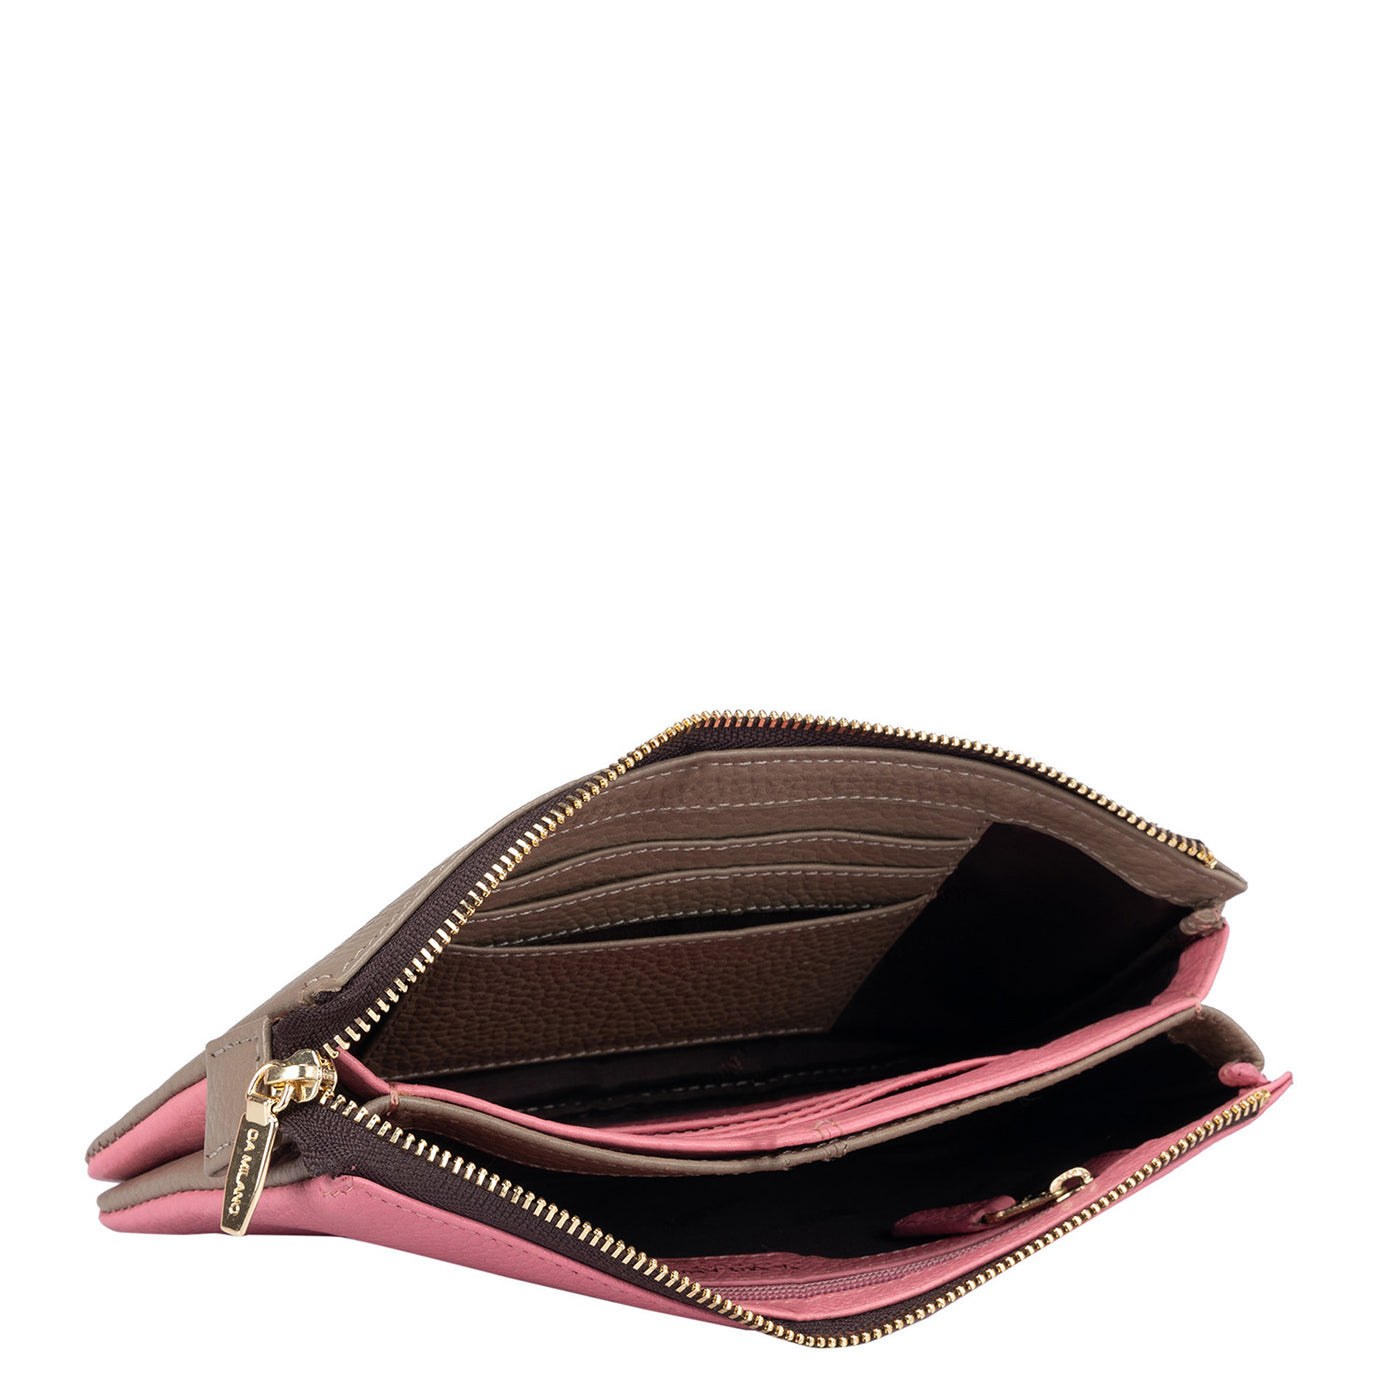 Wax Leather Ladies Wallet - Taupe & Hyper Pink